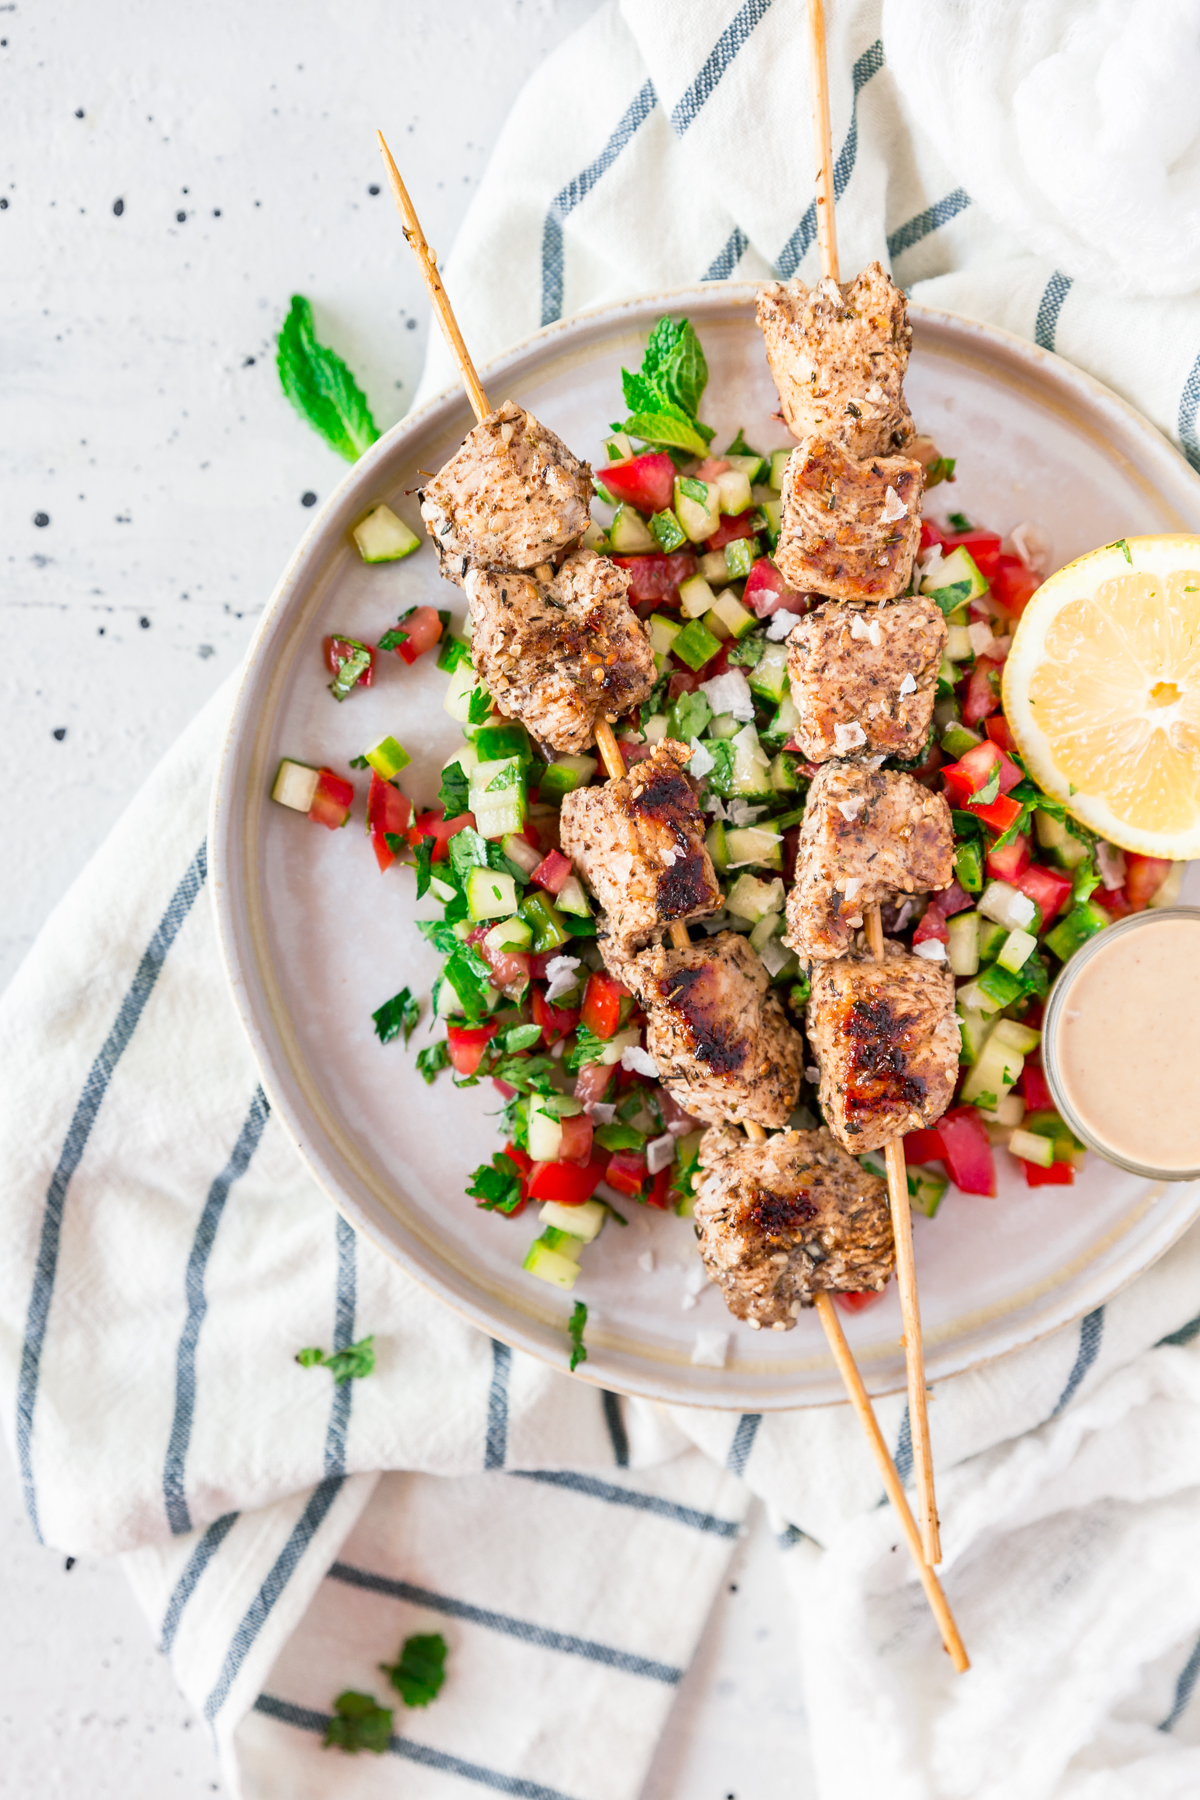 chicken kebabs with za'atar recipe - middle east spices